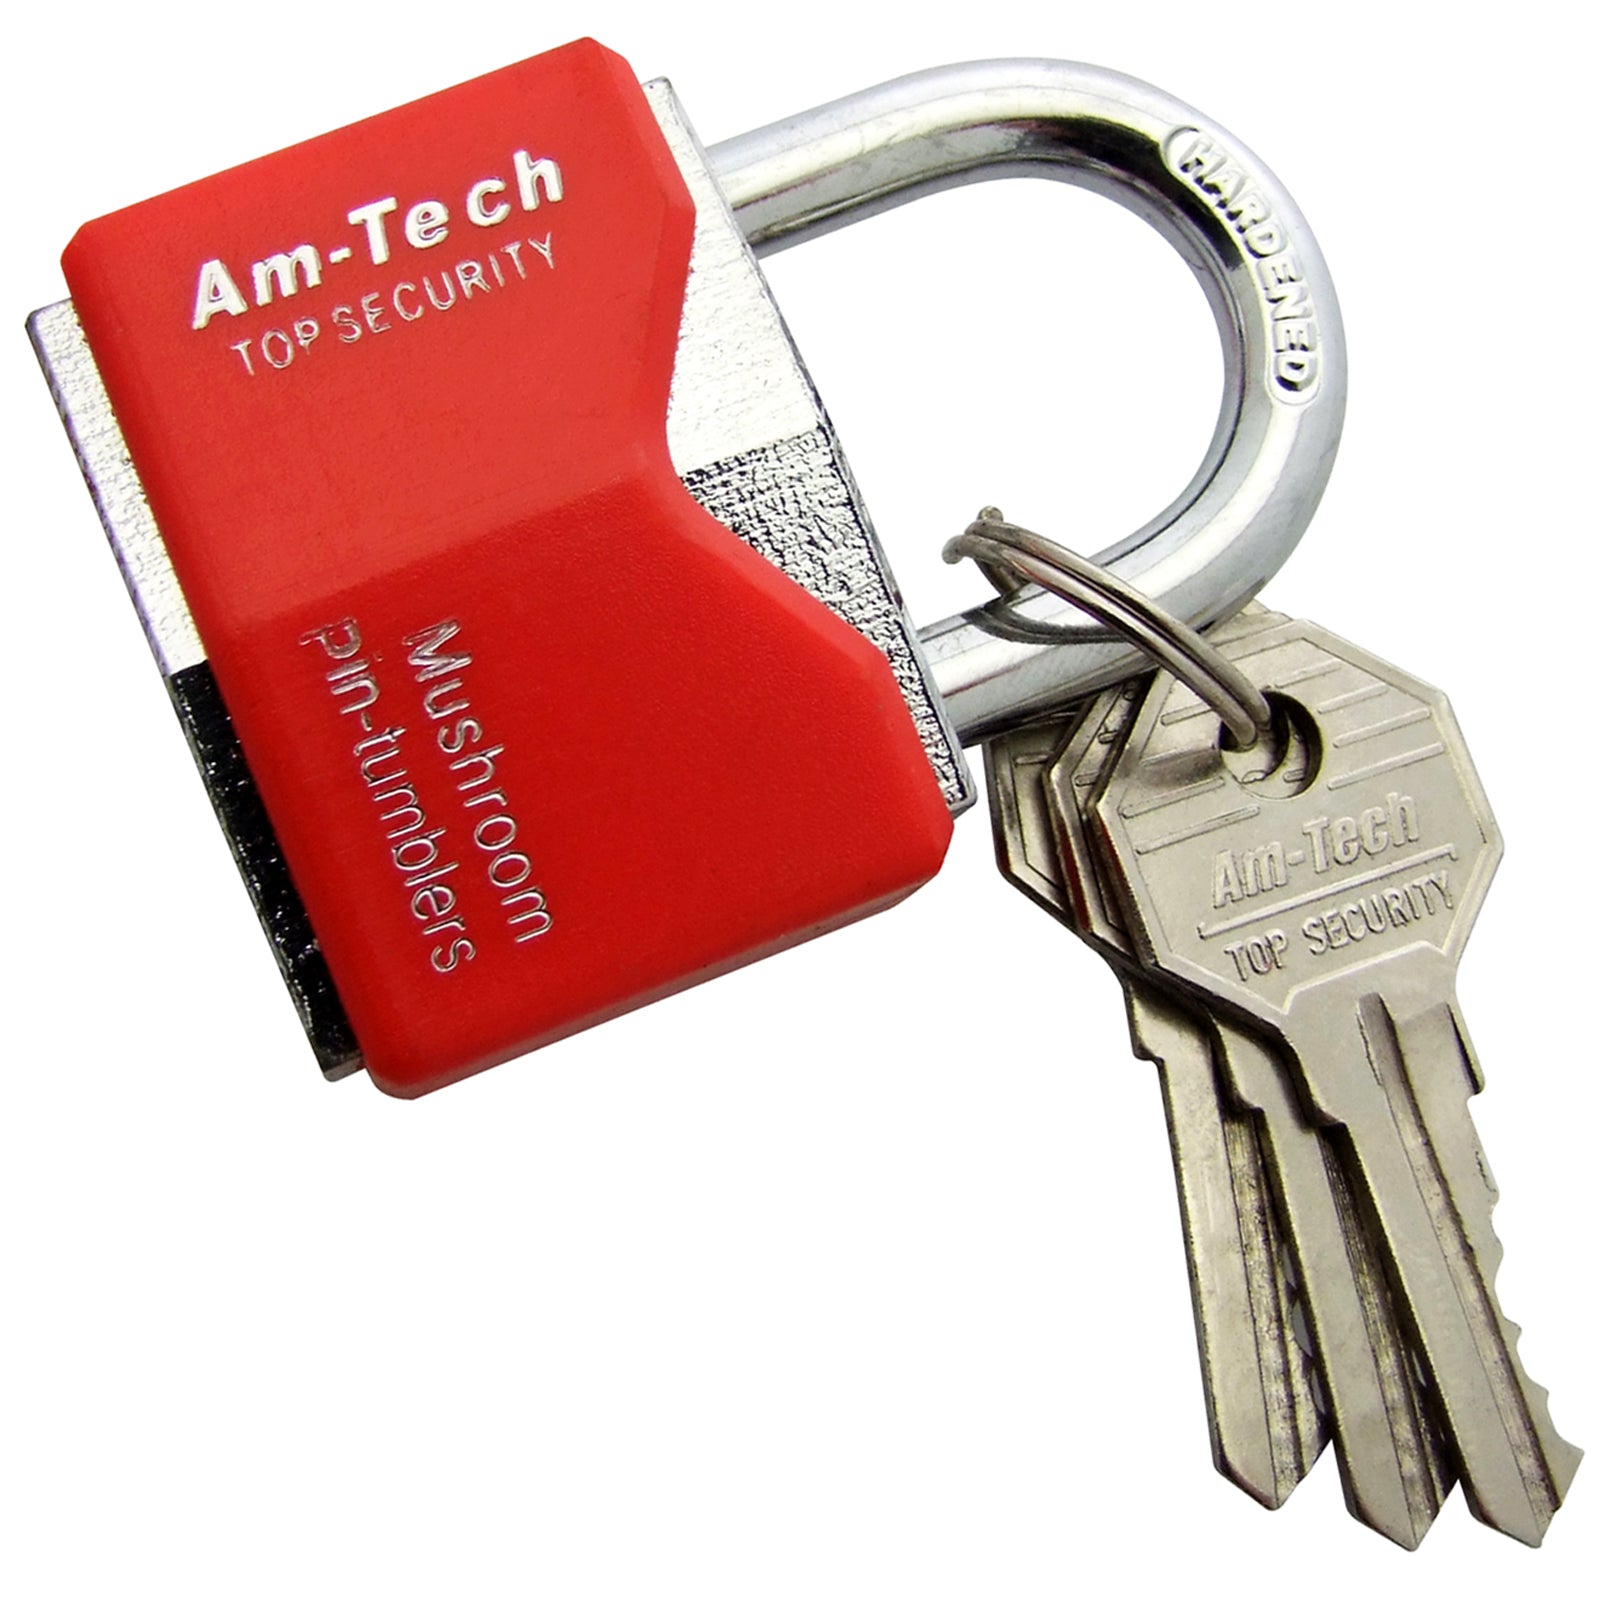 Amtech Rhombic Chrome Plated Padlock With Plastic Cover